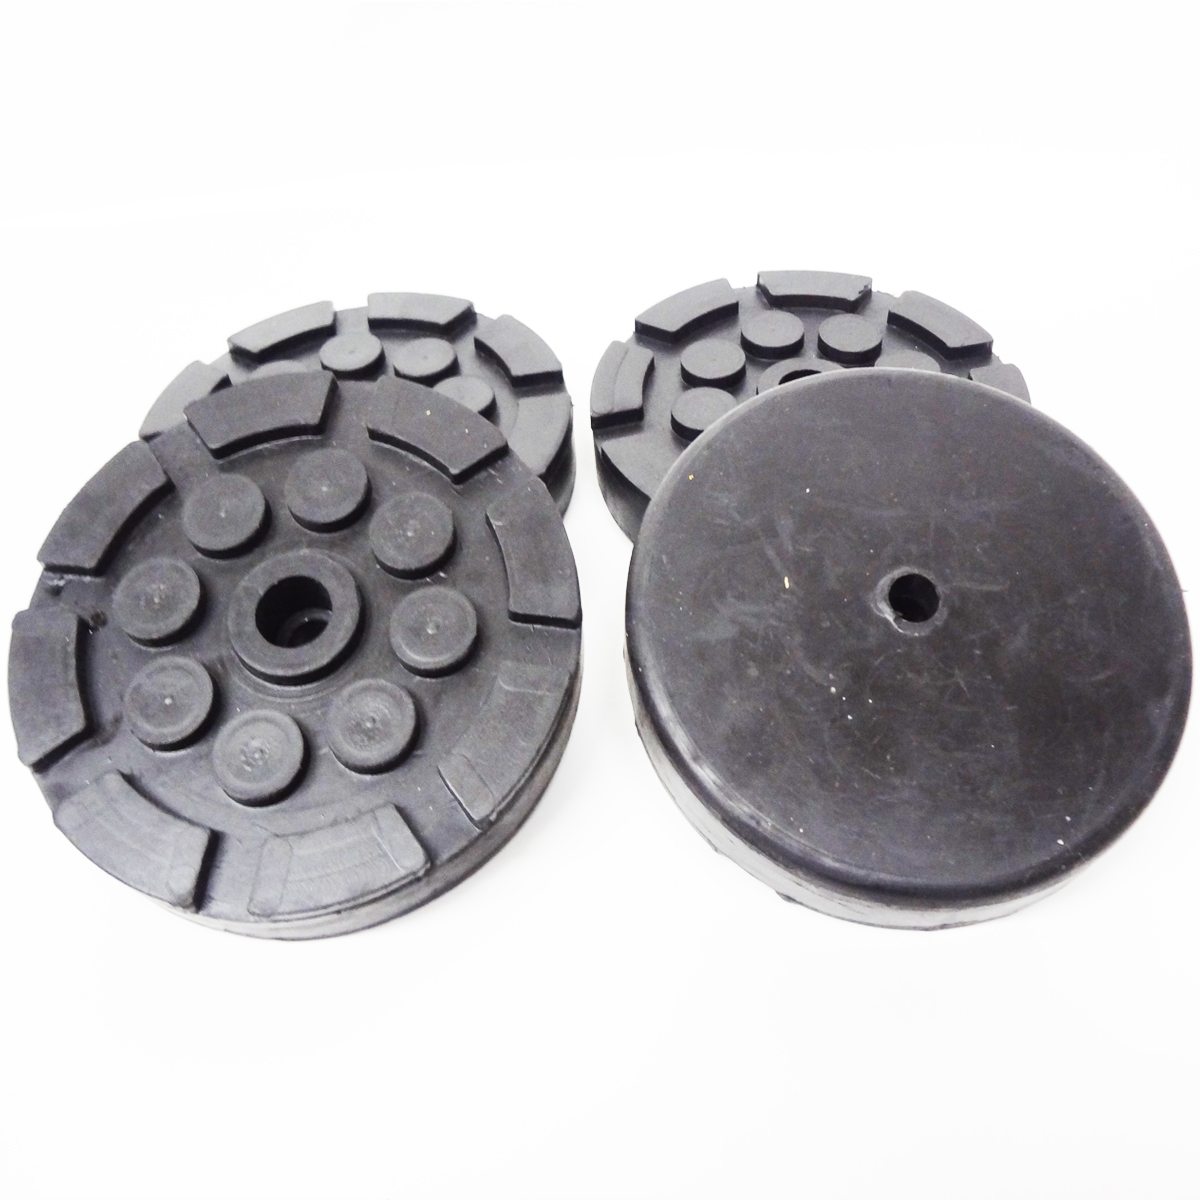 QUALITY LIFT ROUND RUBBER PADS for OLDER STYLE QUALITY LIFTS SET OF 4 26K25030 